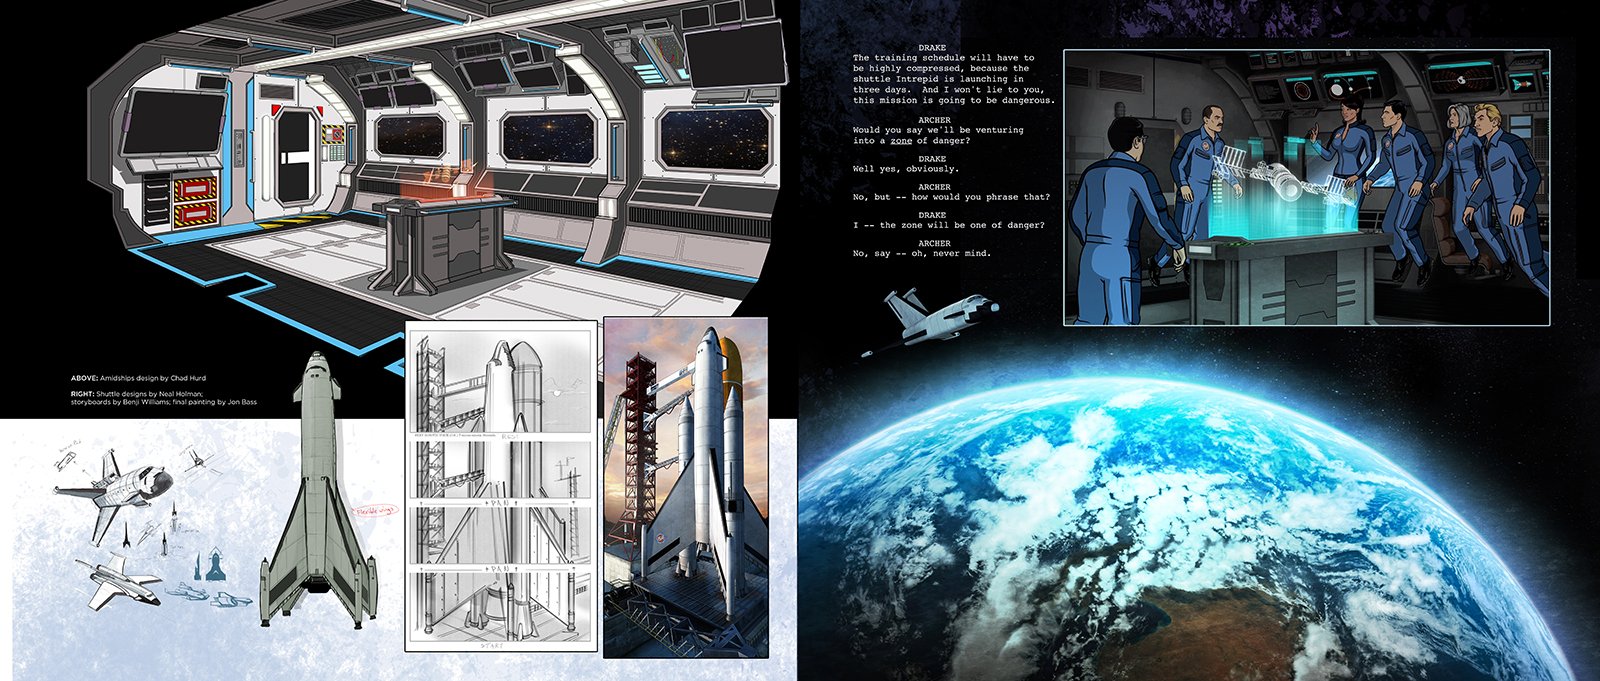 Archer background art development - a page from the book.